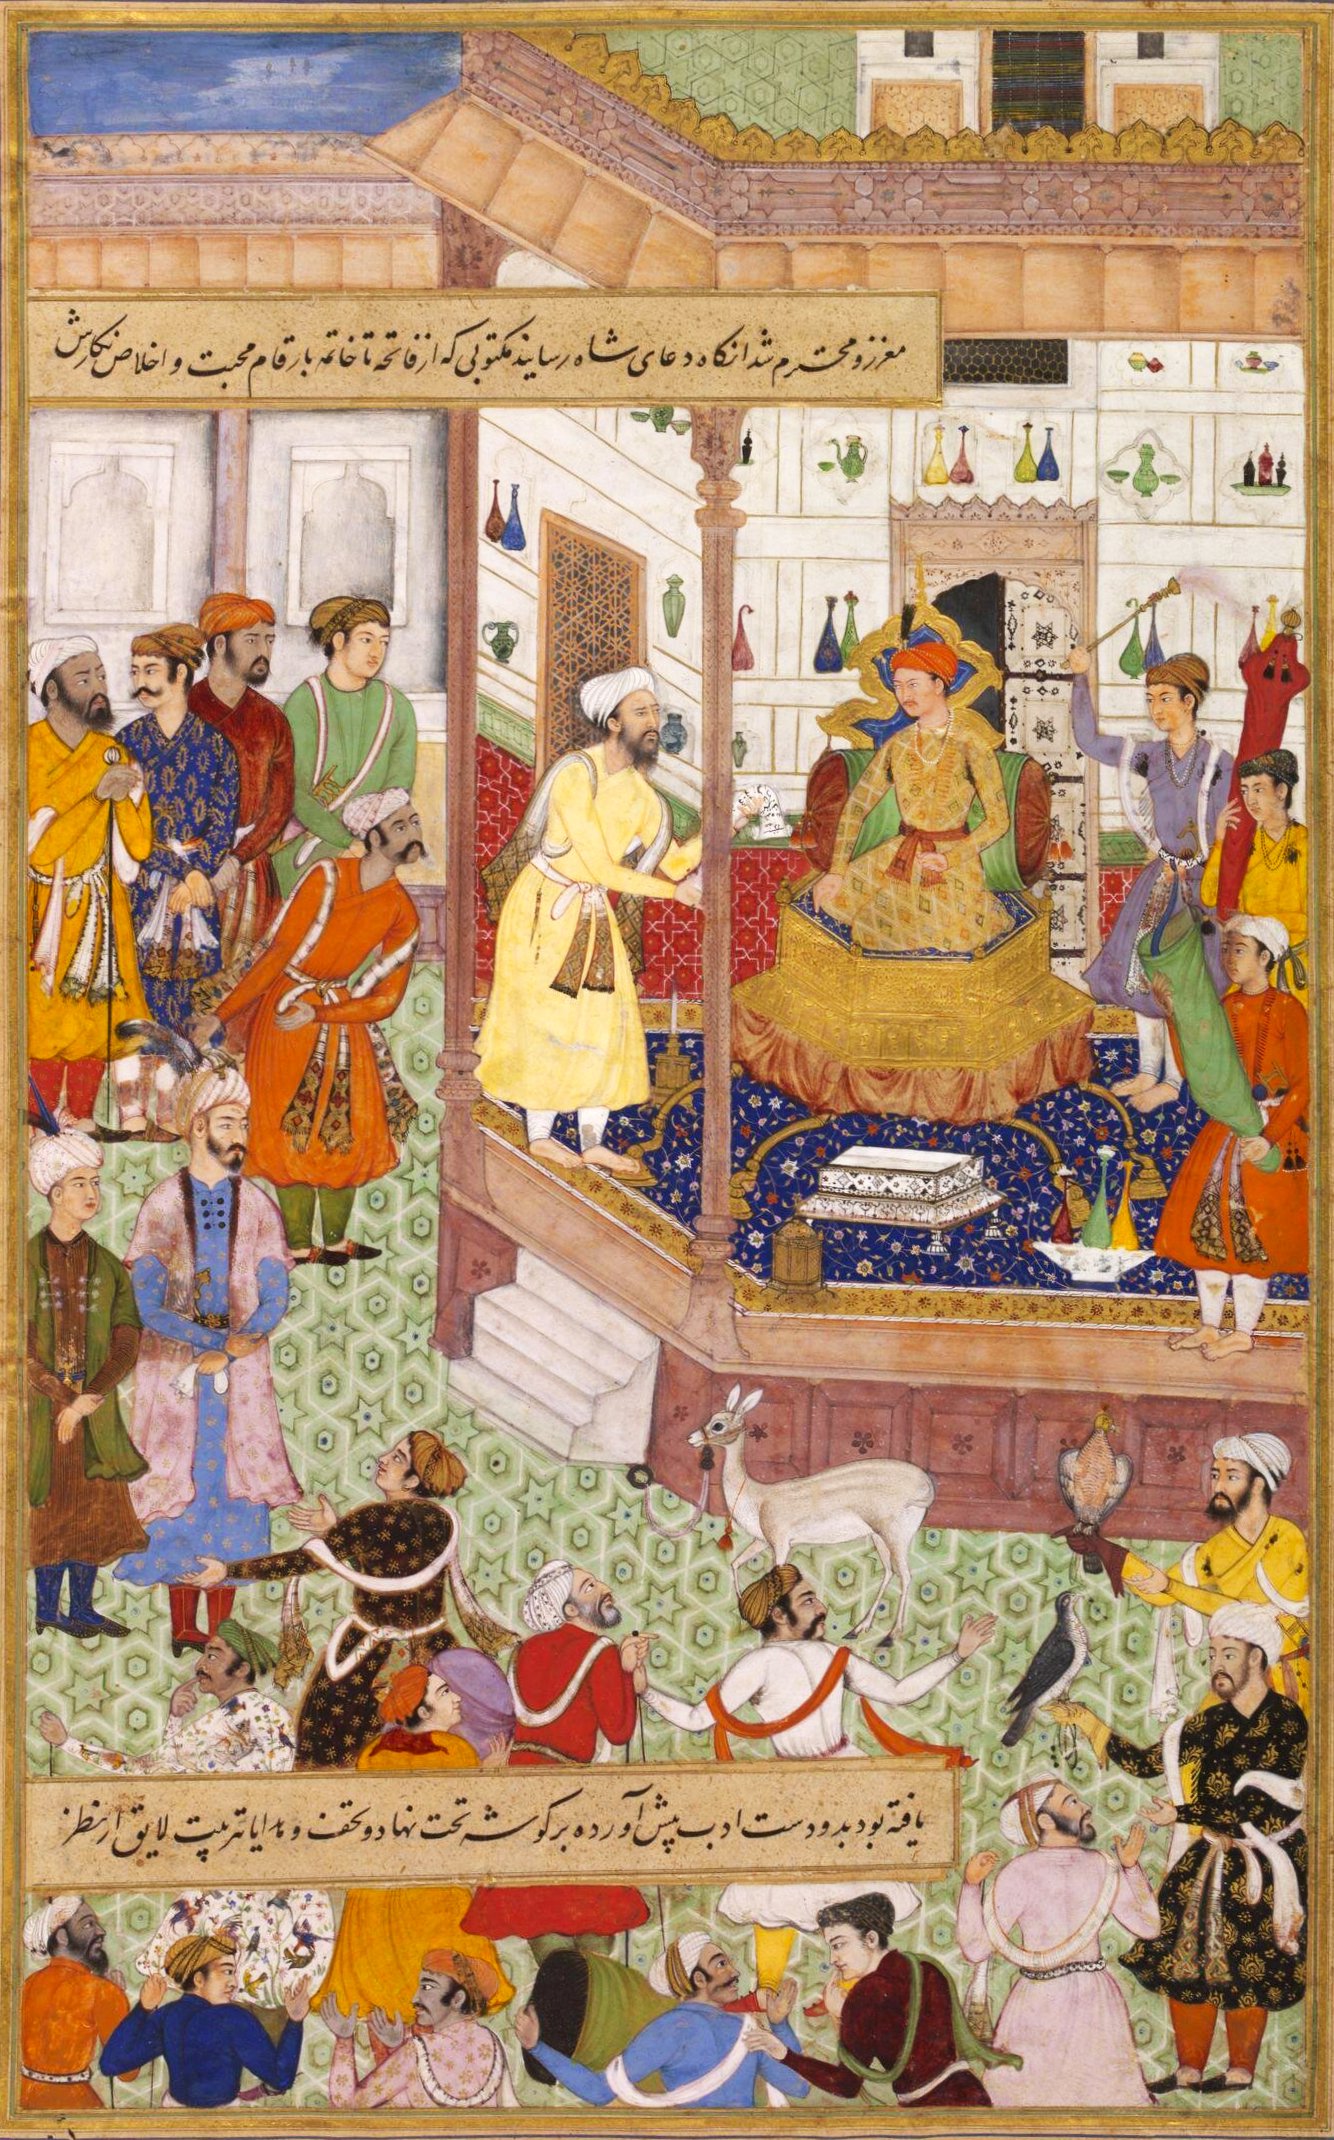 Opaque watercolor and gold painting on paper showing Emperor Akbar at Agra in 1562, greeting Sayyid Beg, the Persian ambassador. The image is framed by two textual bands at the top and bottom, starting from the left edge.